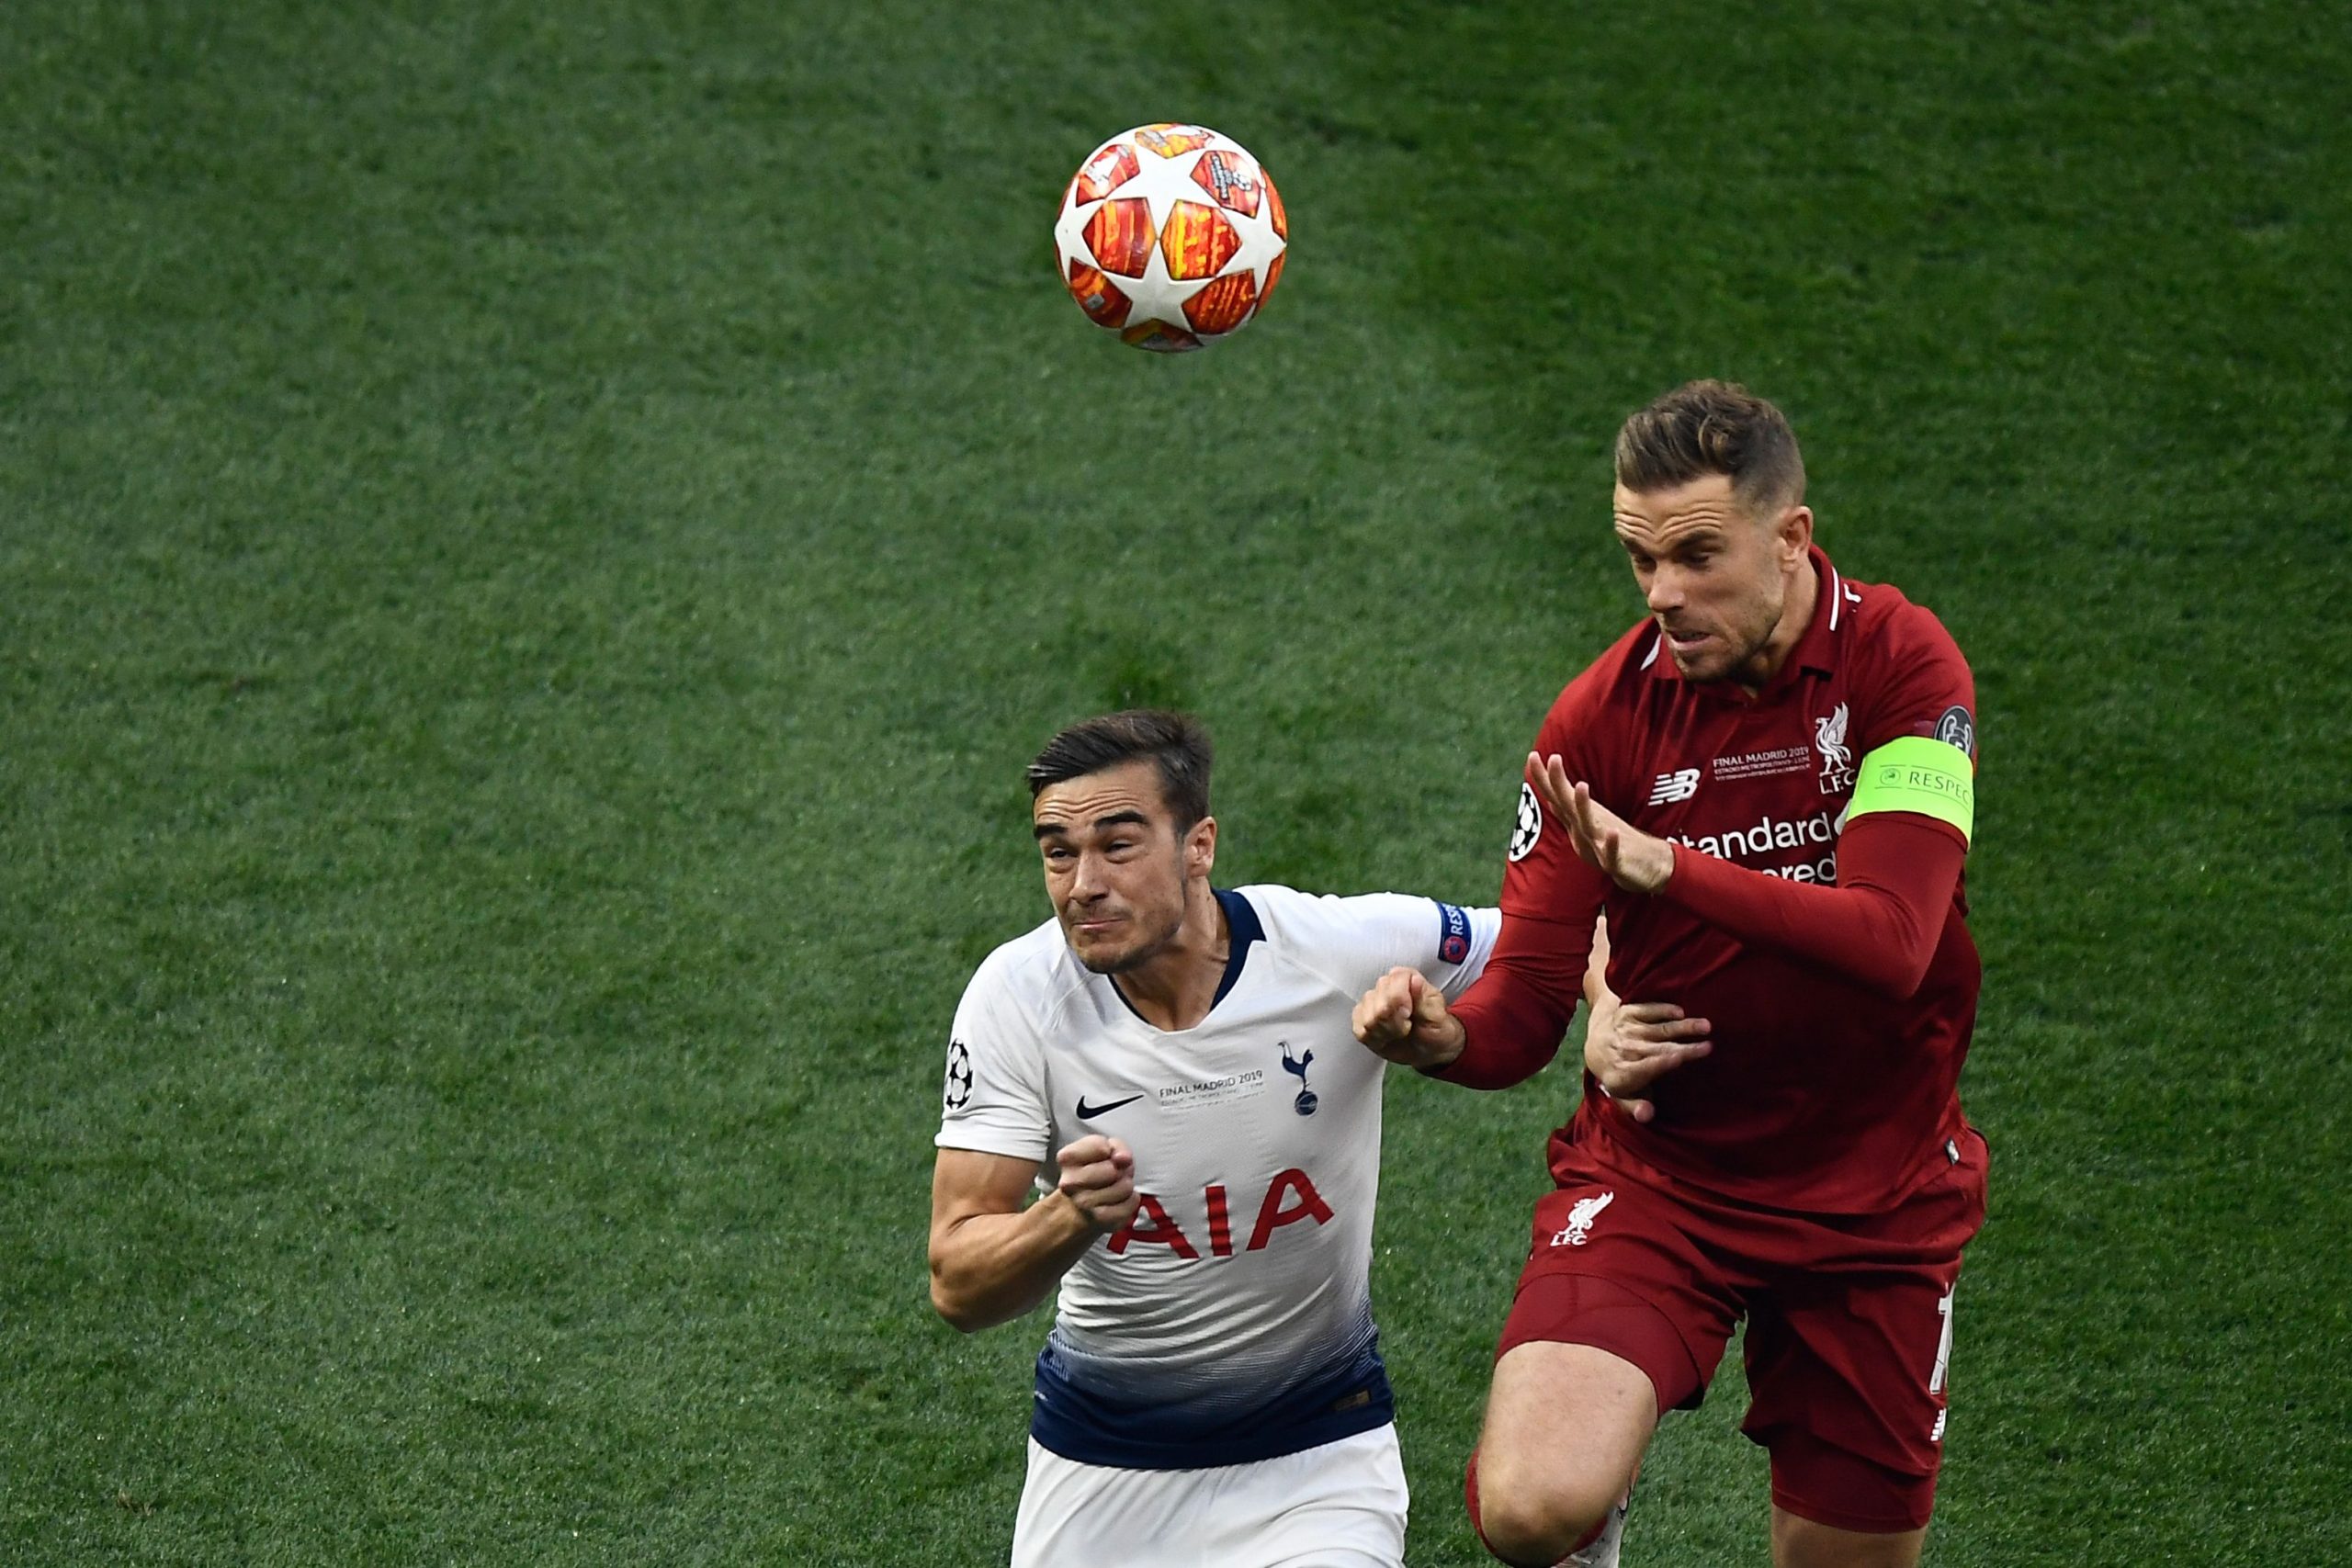 Jordan Henderson vies for the ball with Tottenham Hotspur's Harry Winks during the UEFA Champions League final. (Photo by OSCAR DEL POZO/AFP via Getty Images)